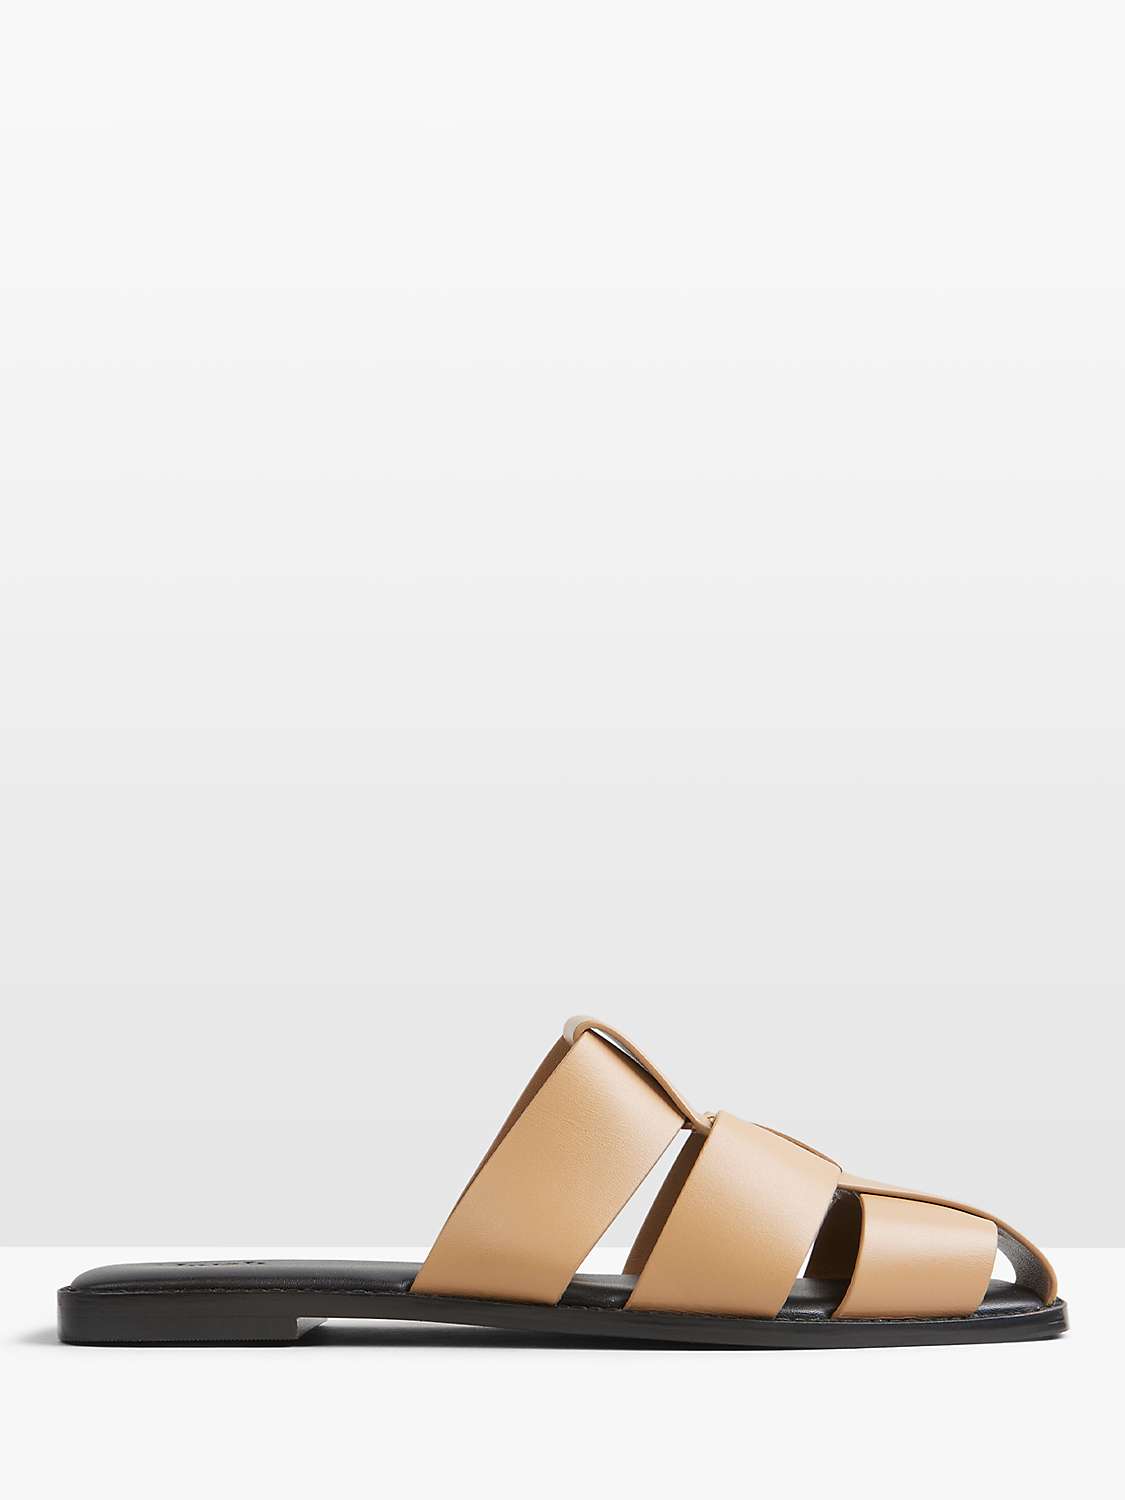 Buy HUSH Penelope Leather Cage Mule Flats, Tan Online at johnlewis.com